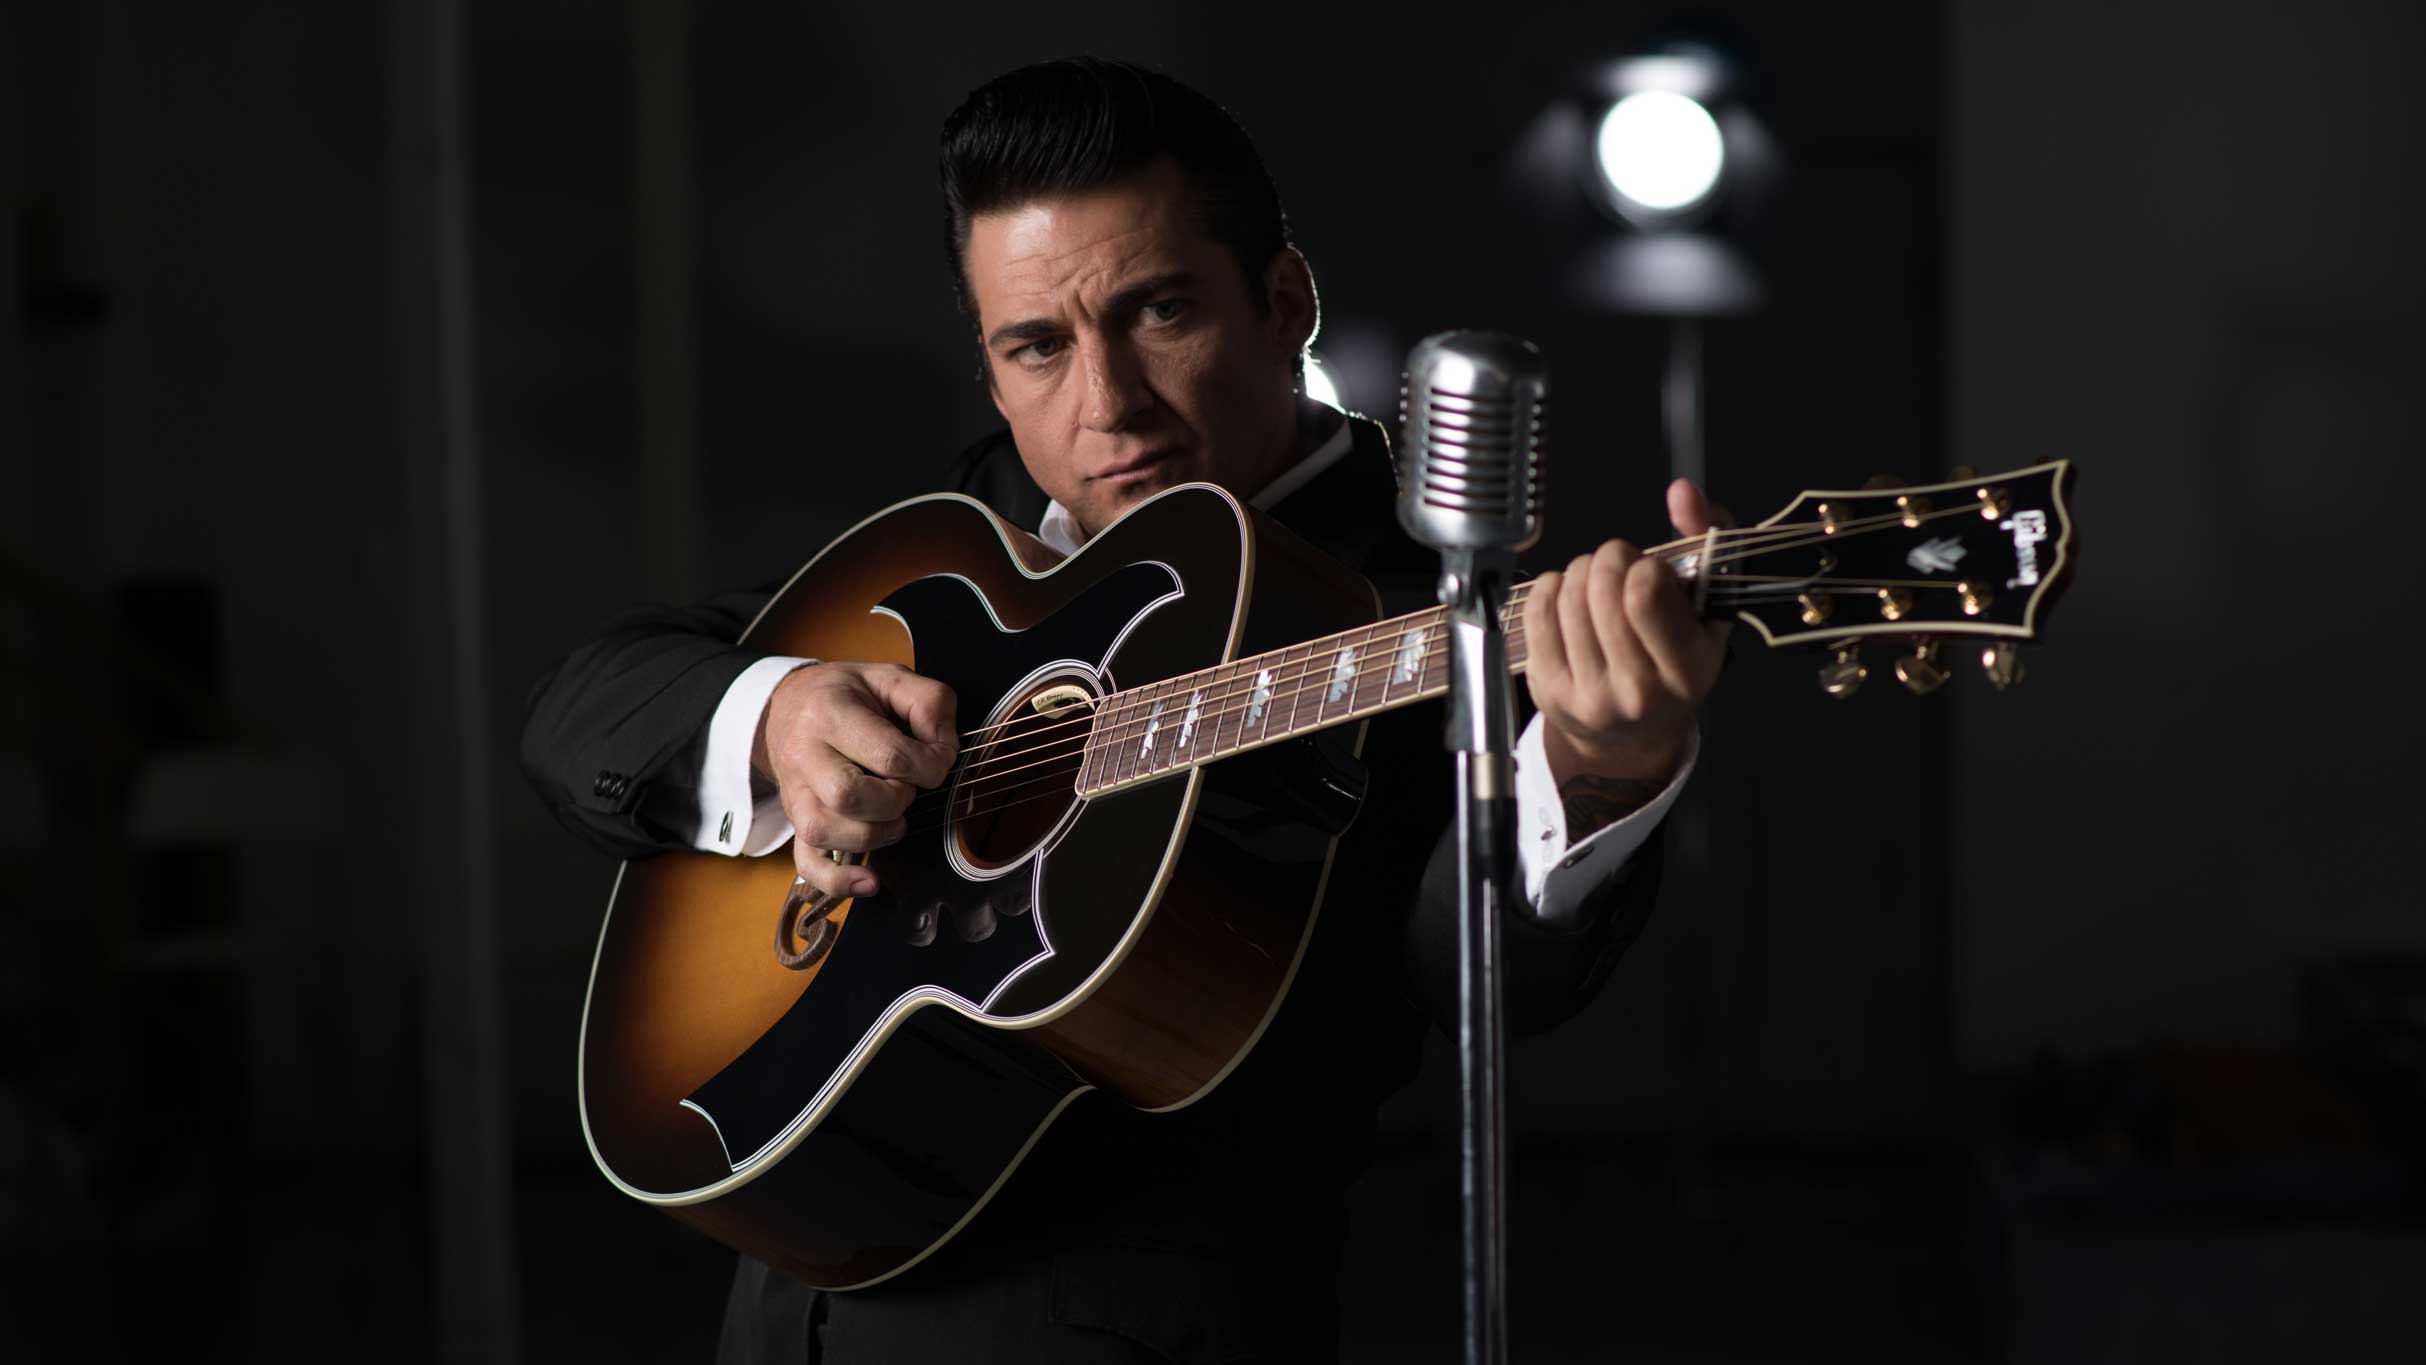 The Man In Black: Tribute To Johnny Cash in Charles Town promo photo for Artist presale offer code